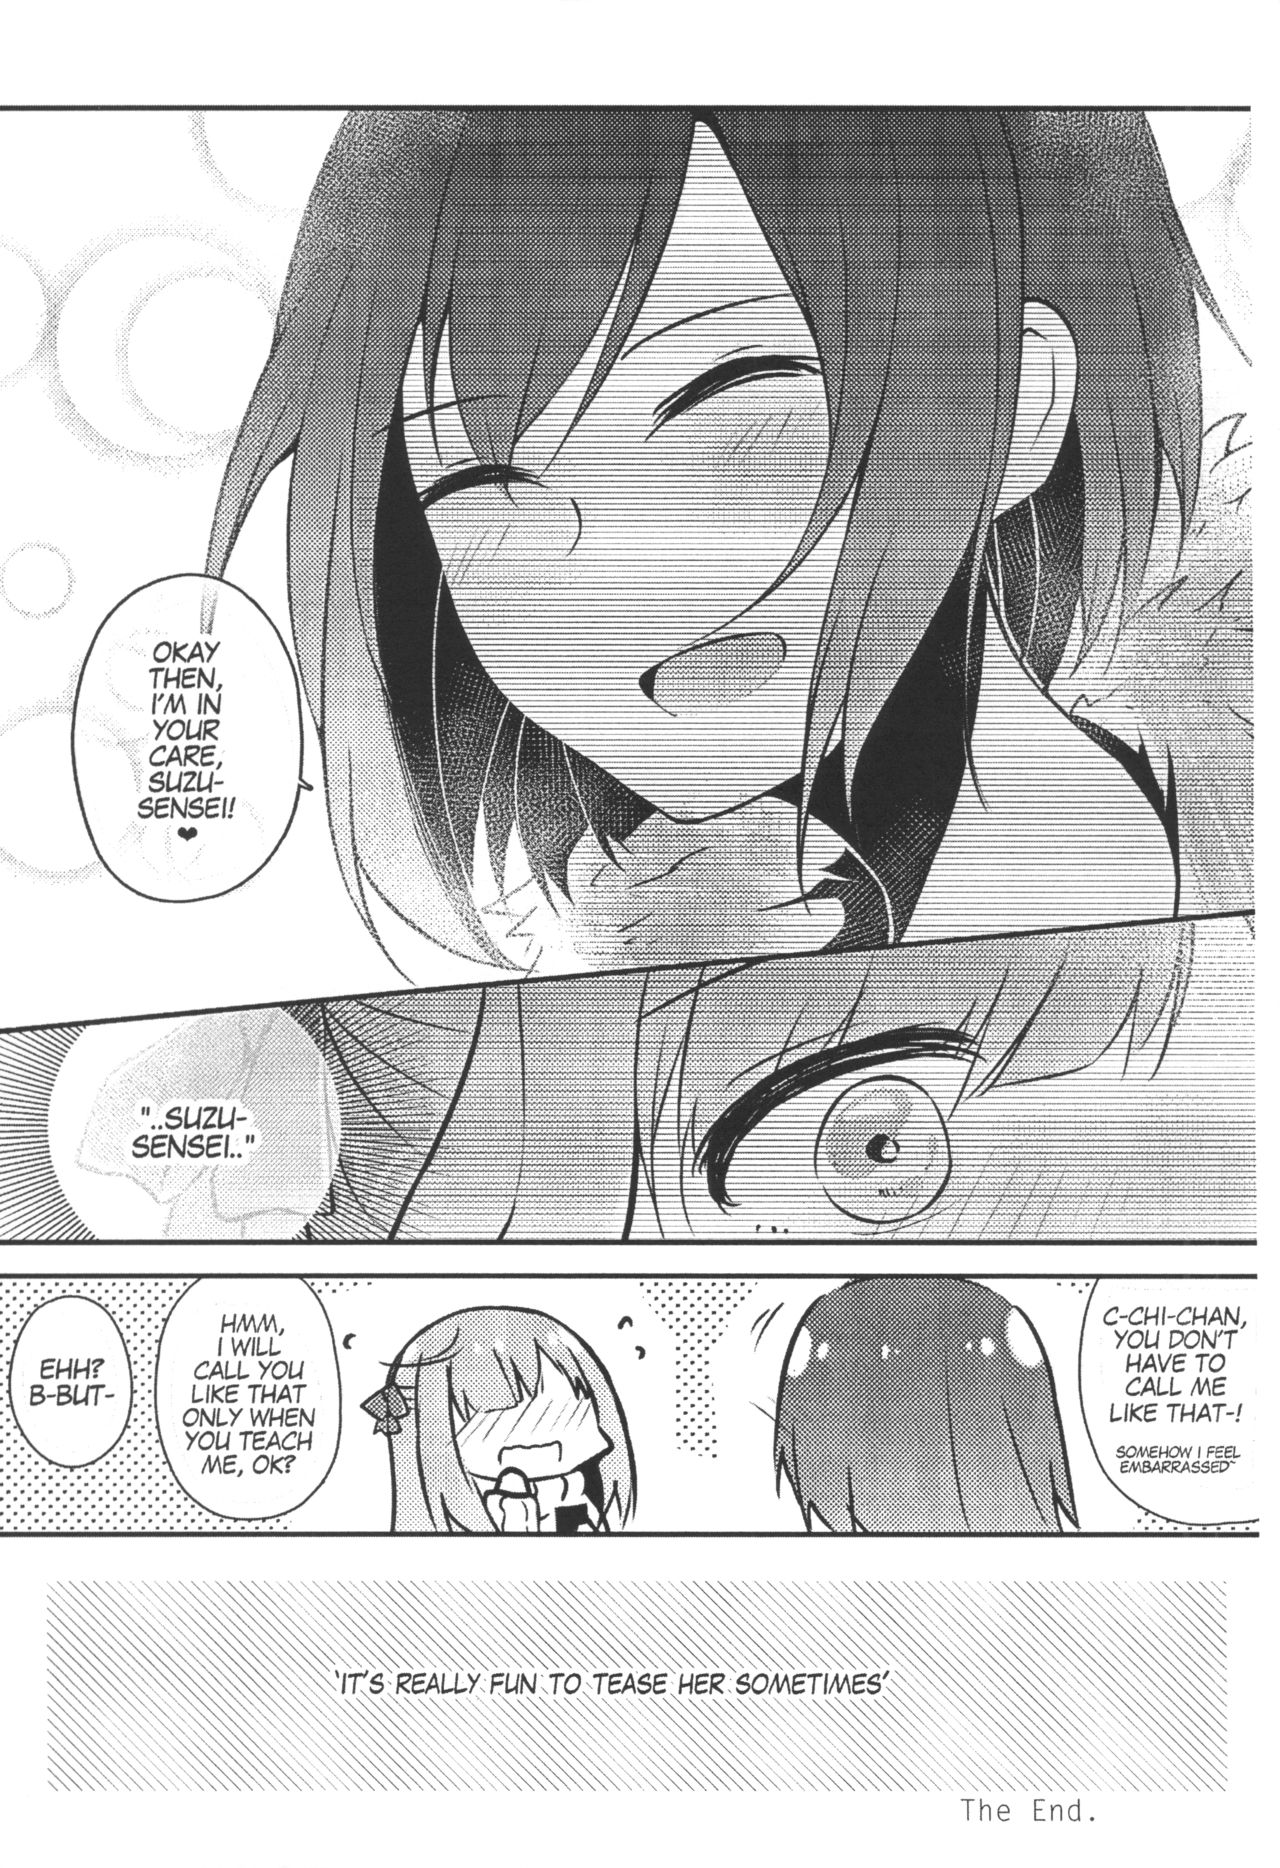 Selector Infected WIXOSS Between Hopes and their Cards (Doujinshi) Oneshot